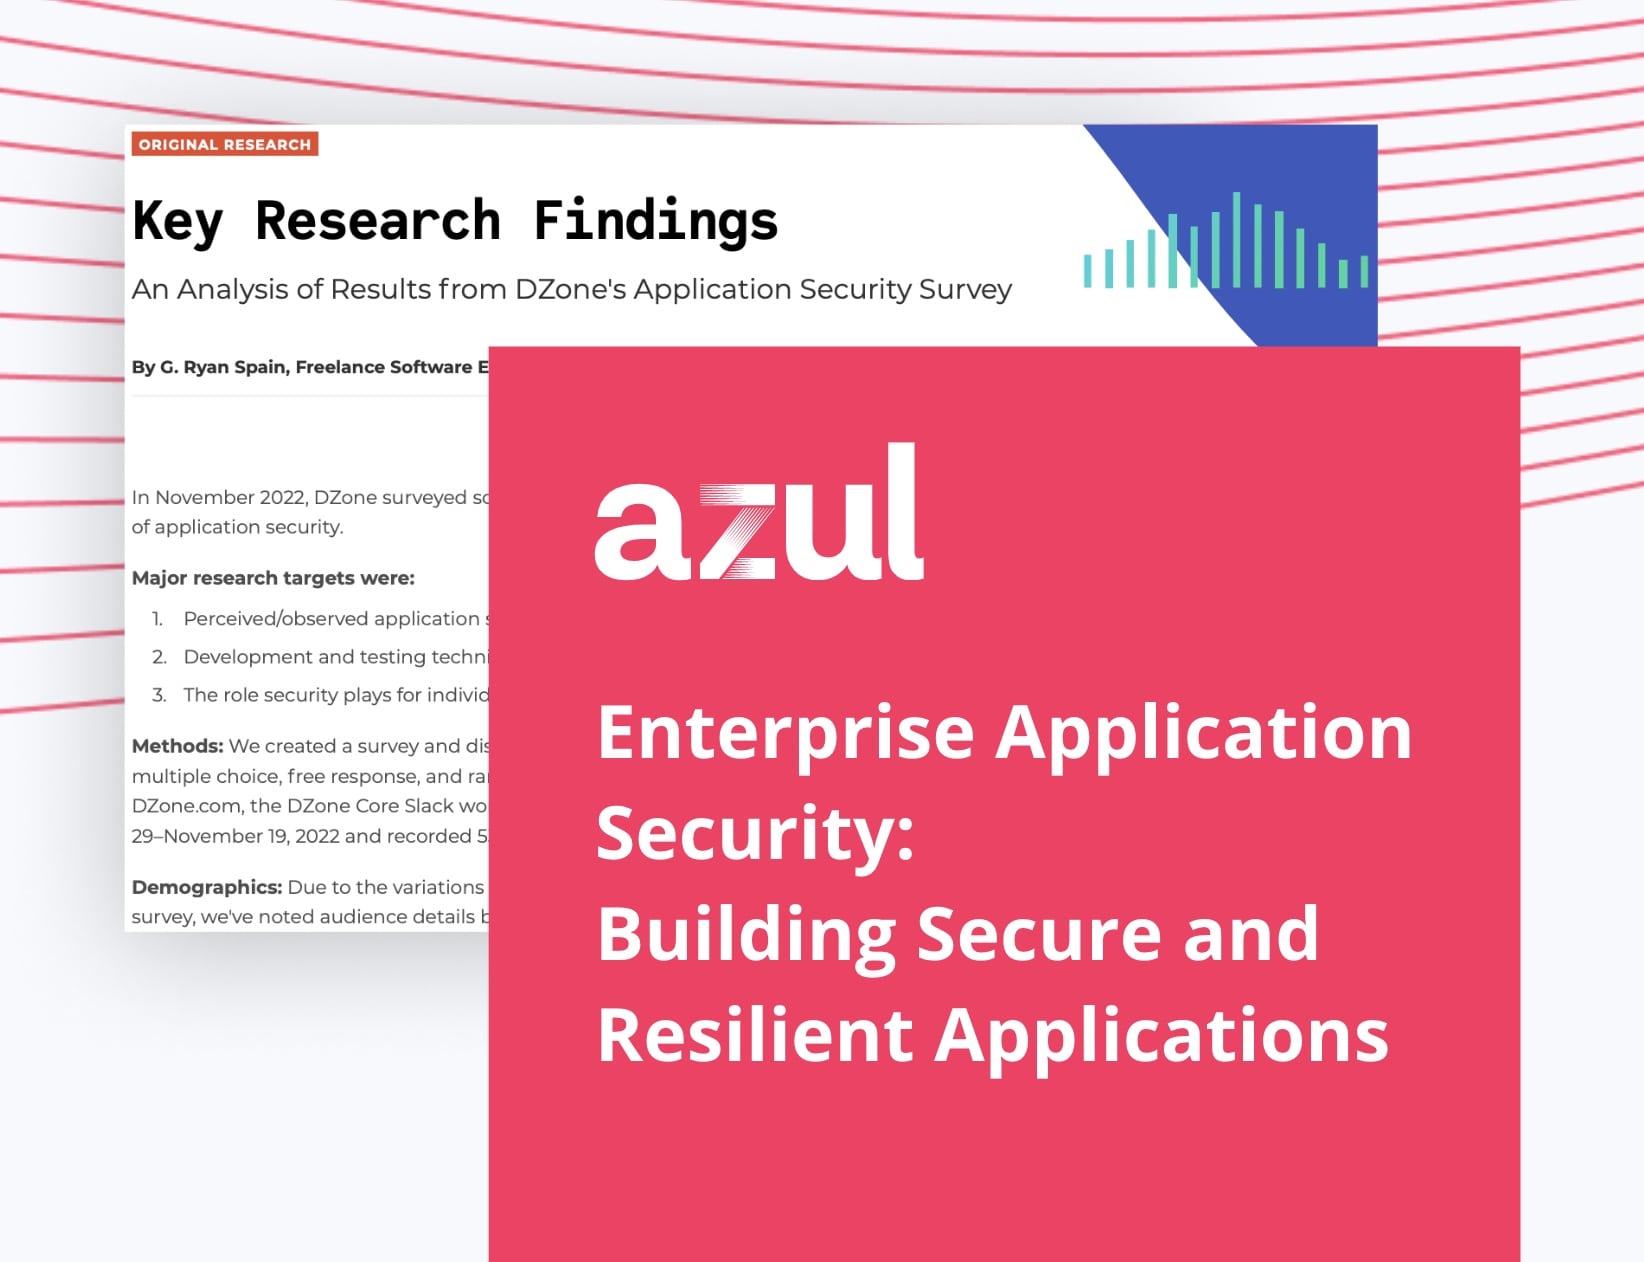 Enterprise Application Security - Building Secure and Resilient Applications